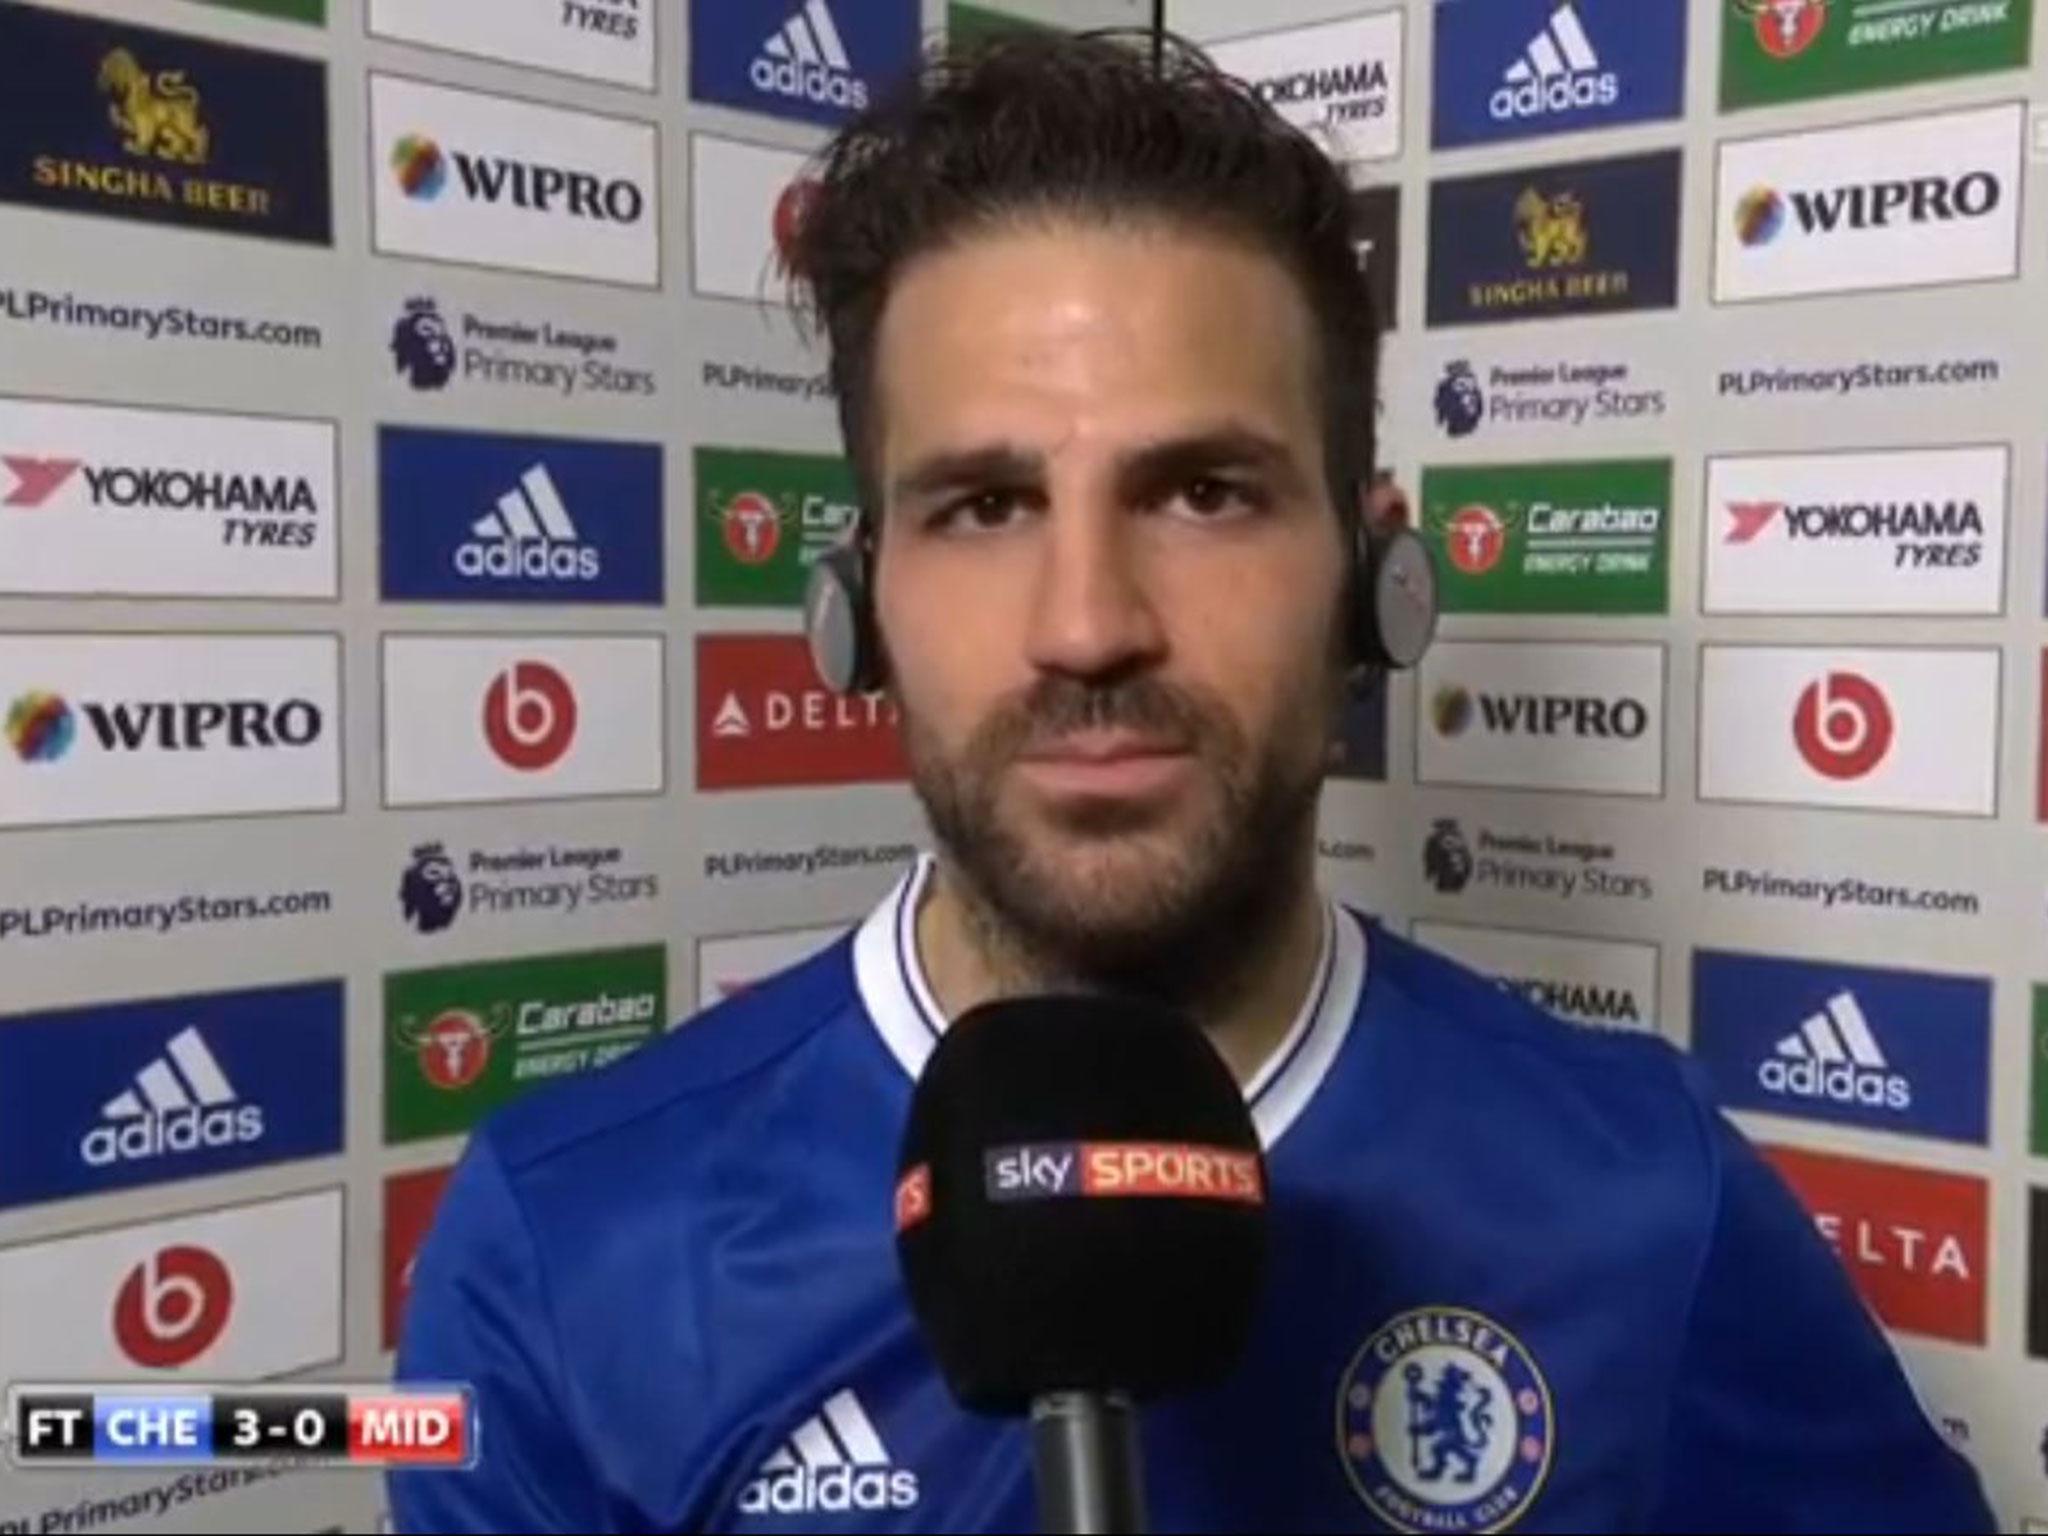 Cesc Fabregas discovered he'd had an assist taken away from him during a live TV interview